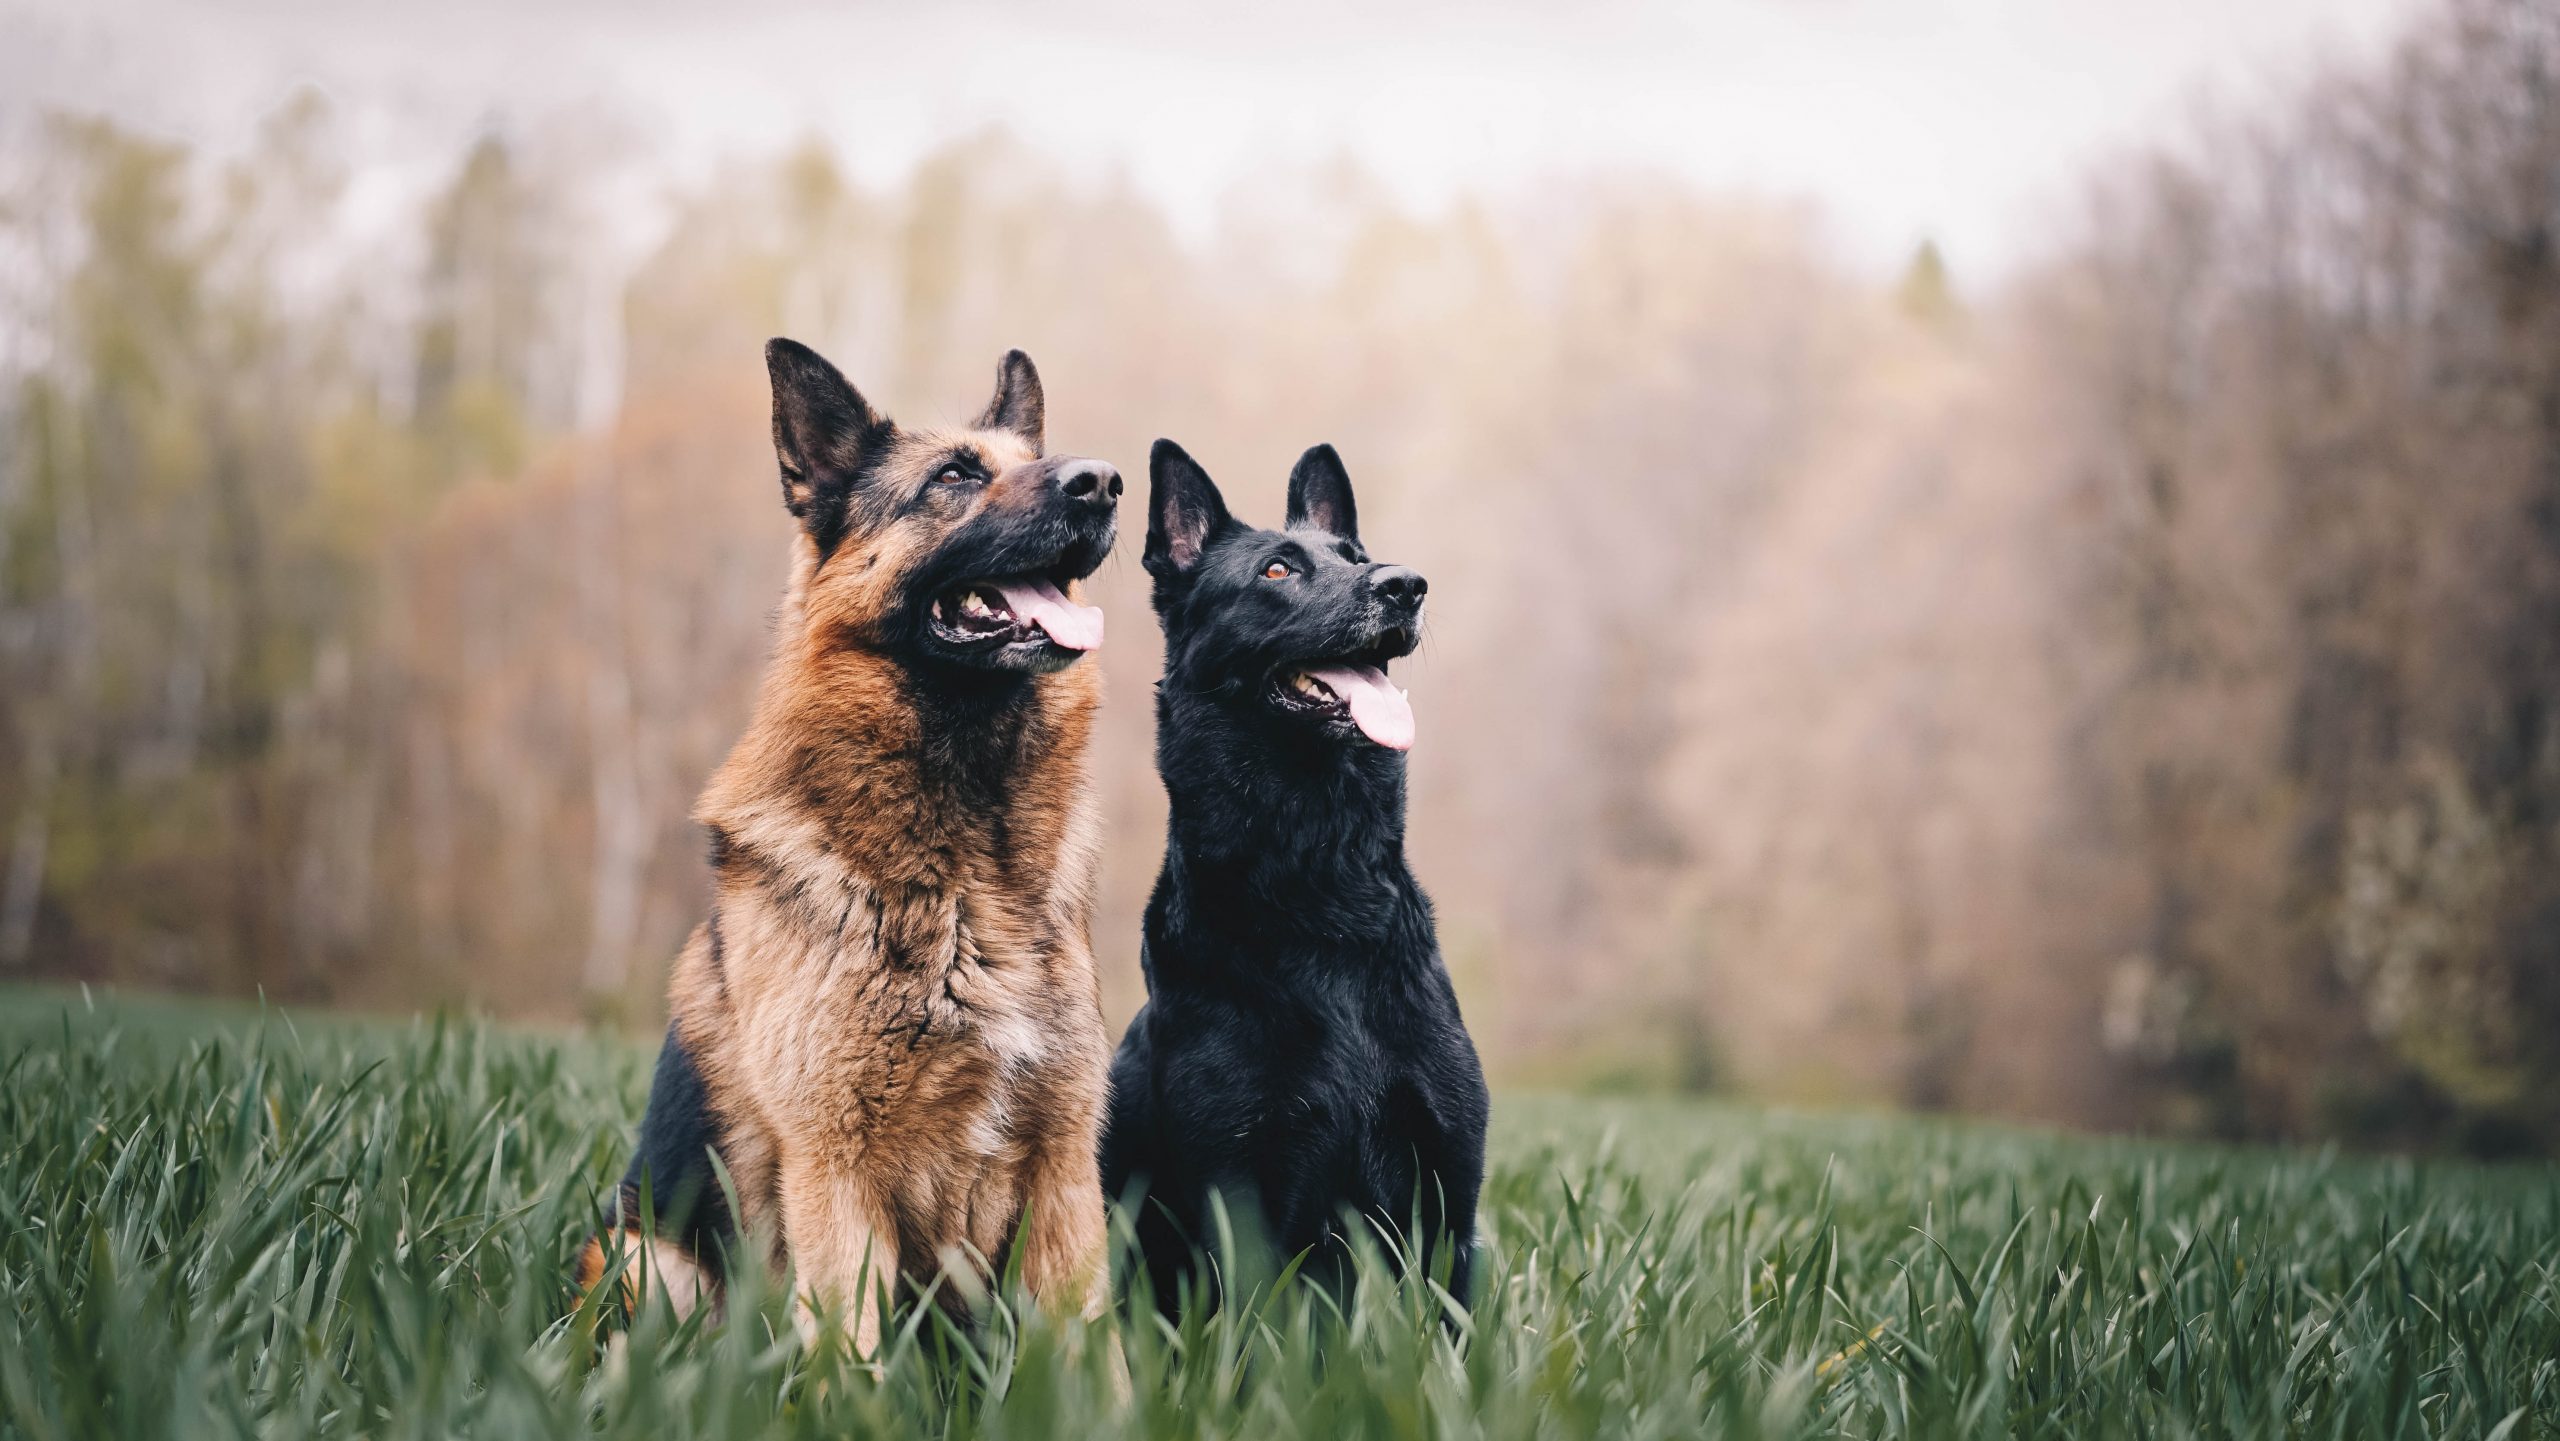 The BEST tactical Harness for German Shepherds